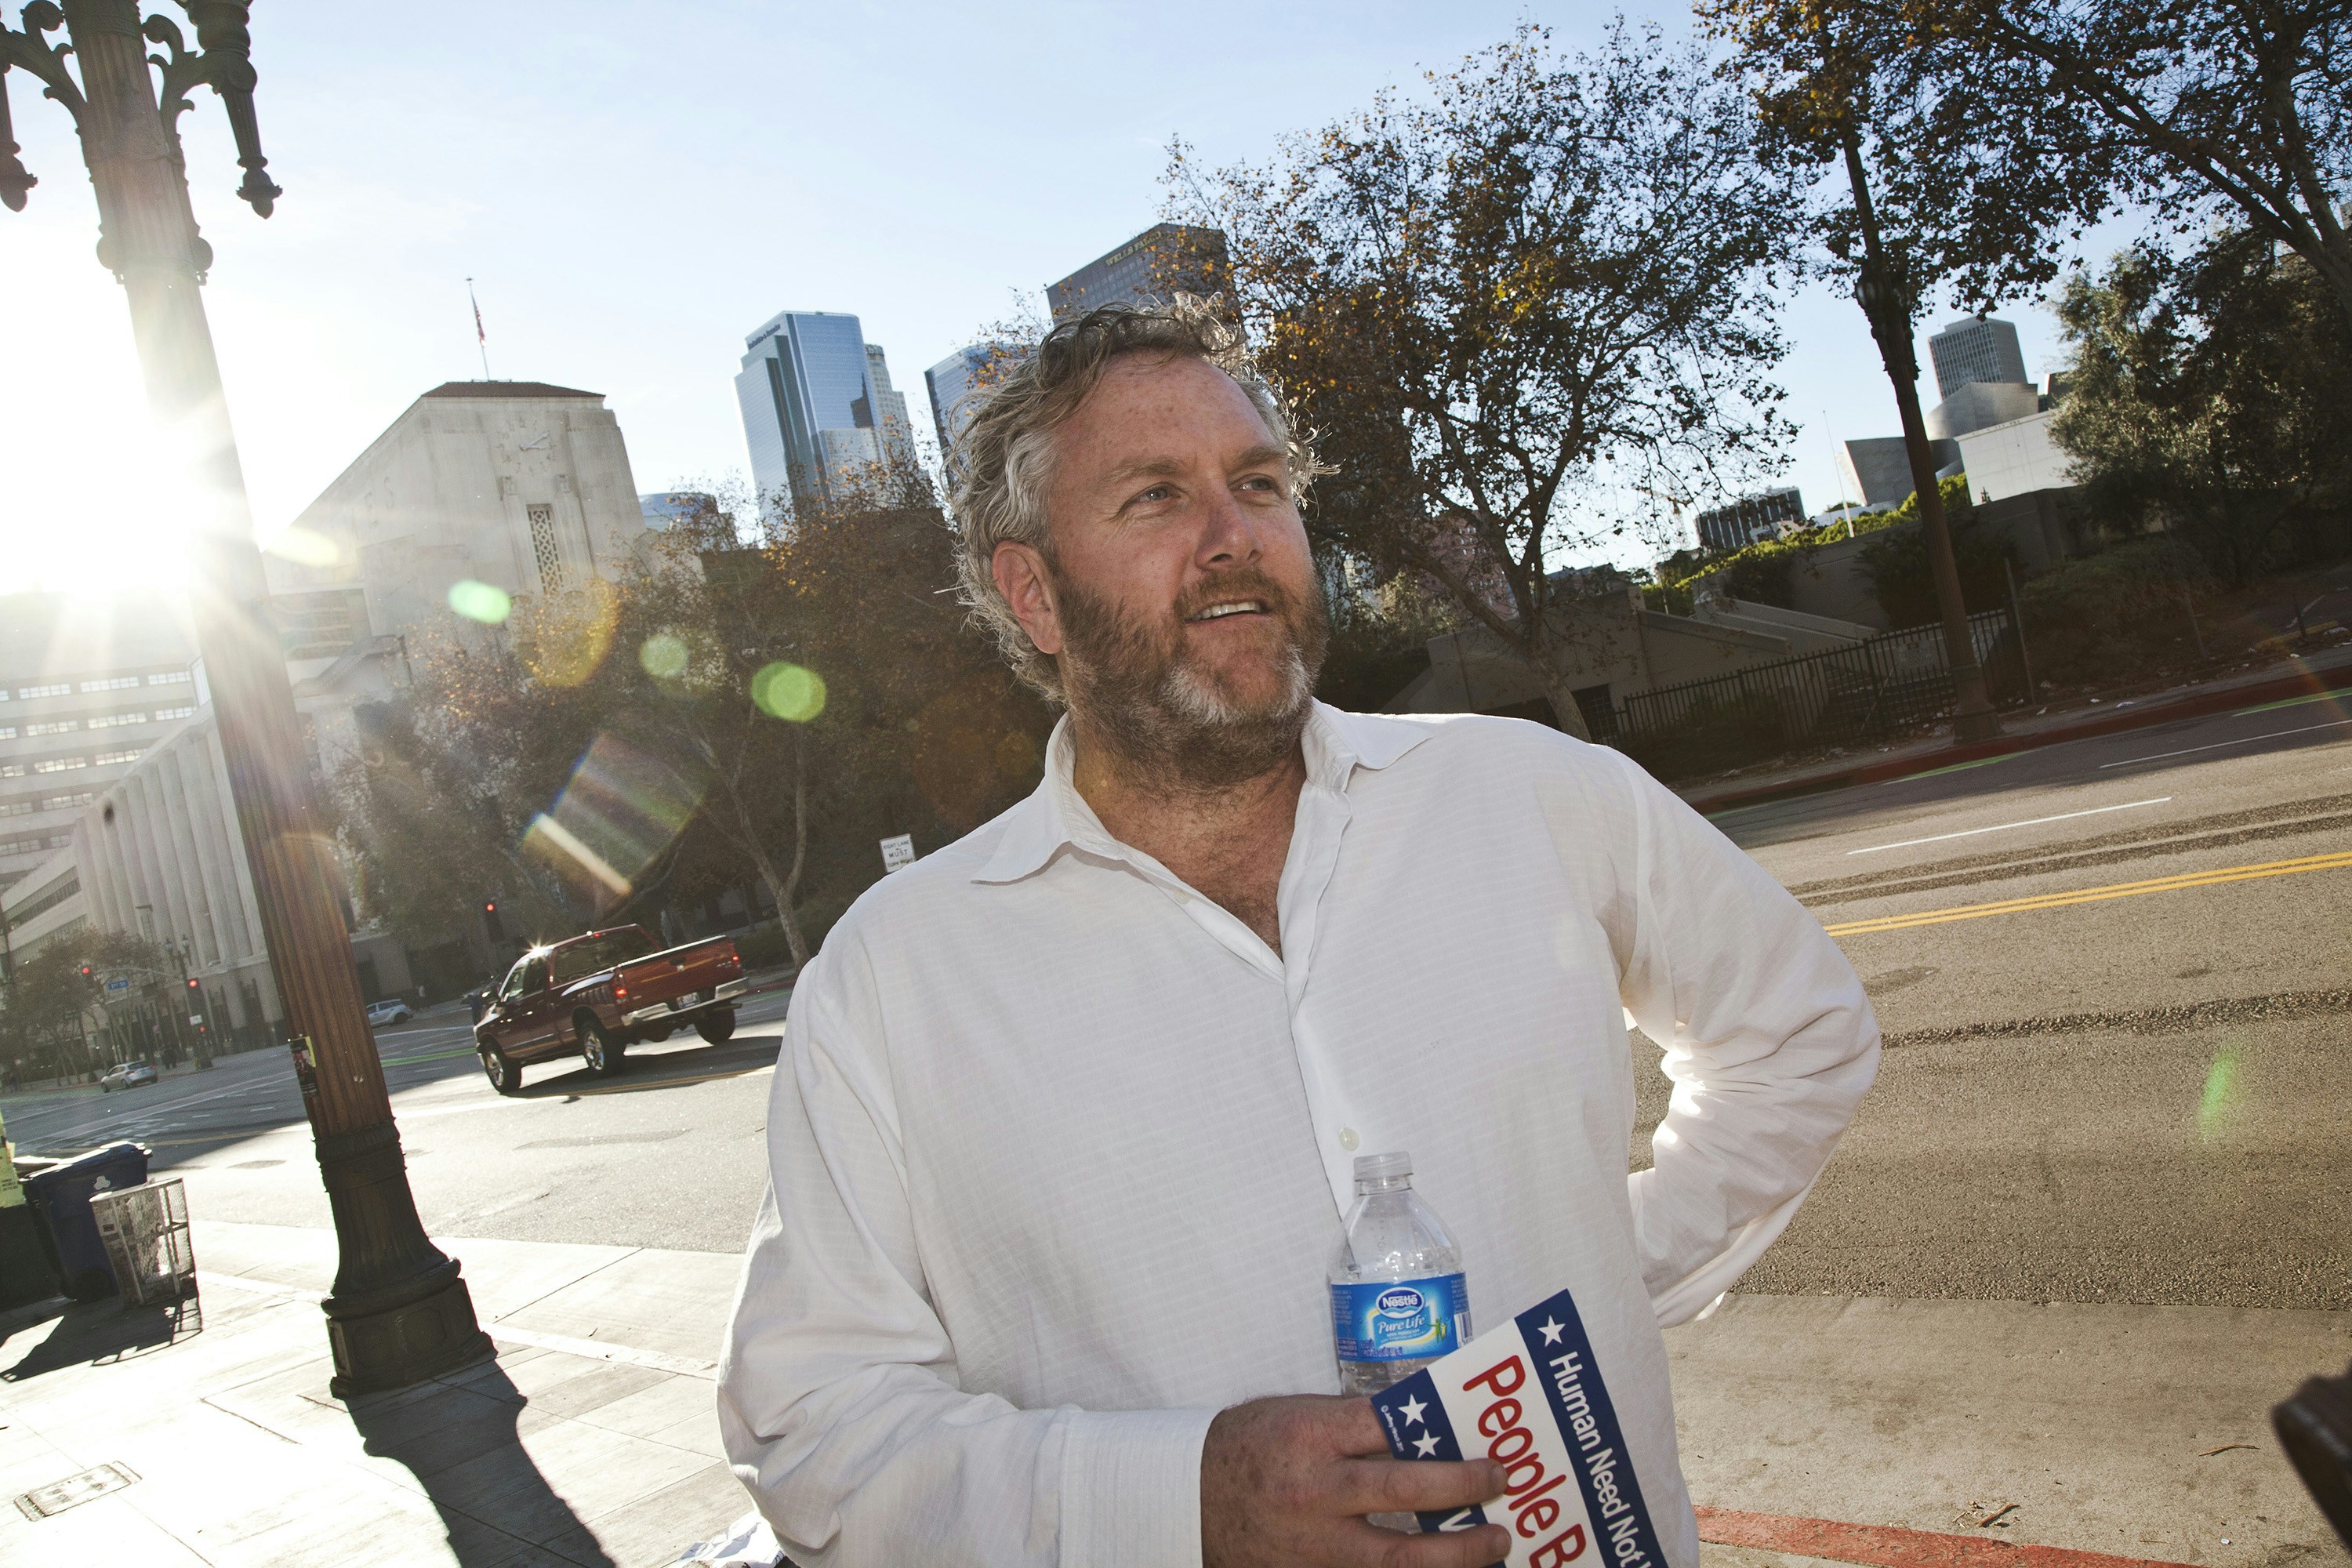 Conservative blogger Andrew Breitbart at the Occupy L.A. site. He was interviewing occupiers for his blog and TV program. (Photo by Ted Soqui/Corbis via Getty Images)